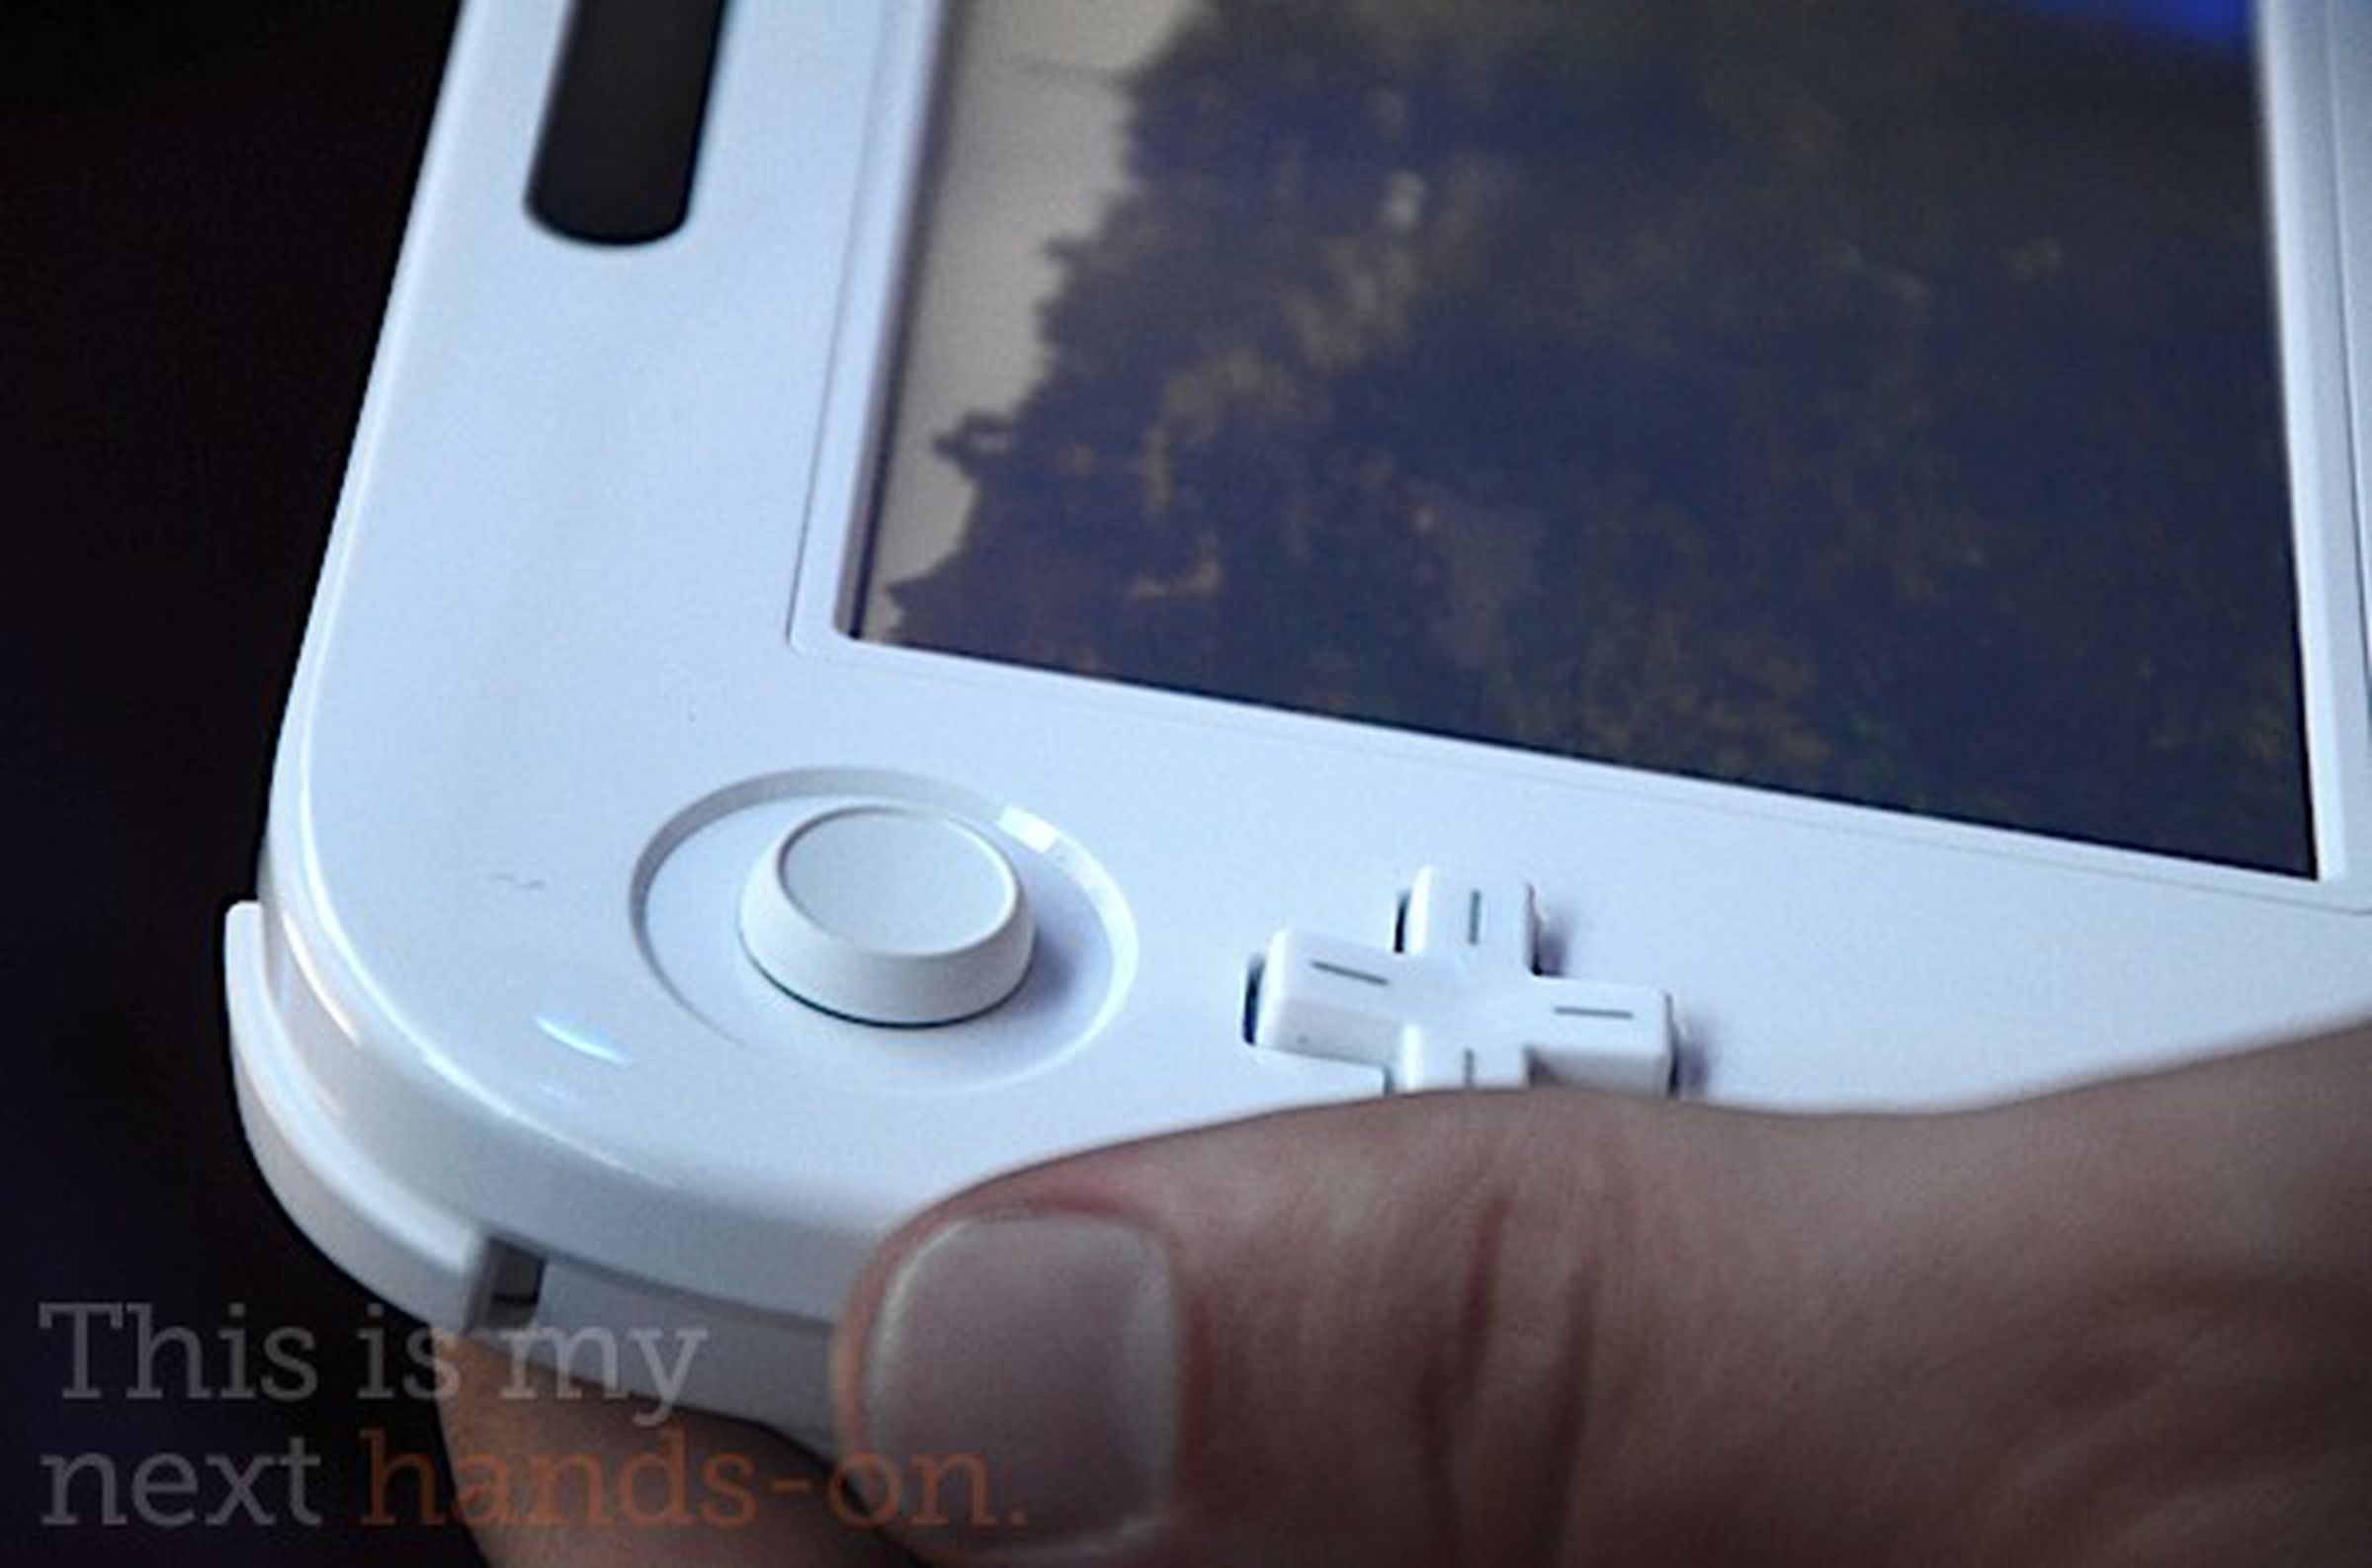 Nintendo Wii U hands-on preview pictures